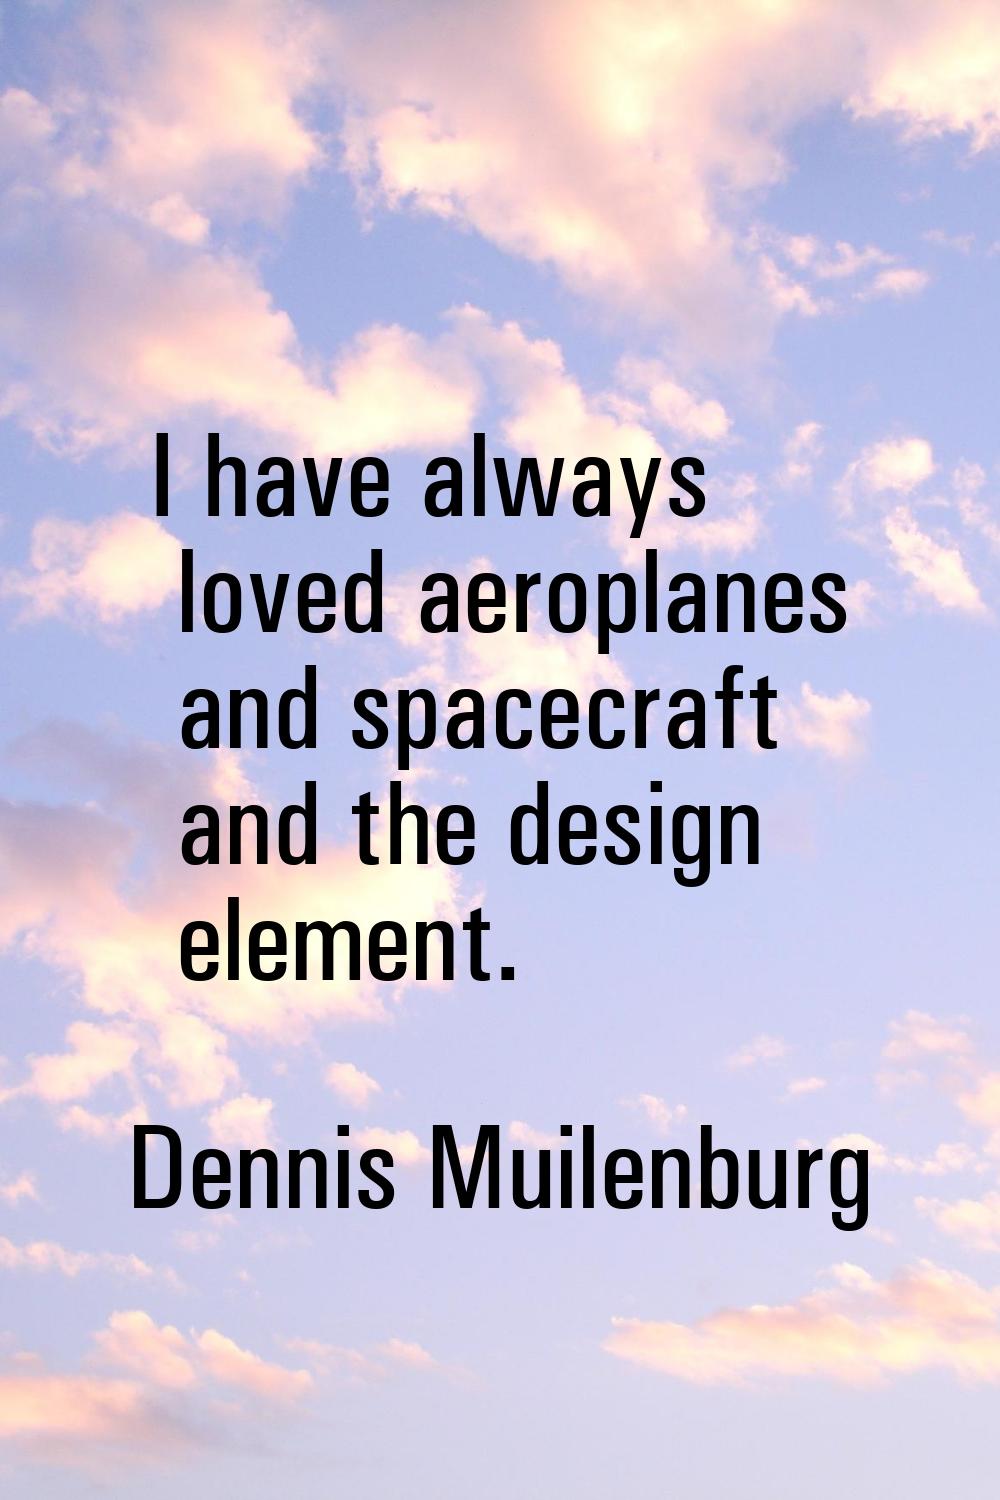 I have always loved aeroplanes and spacecraft and the design element.